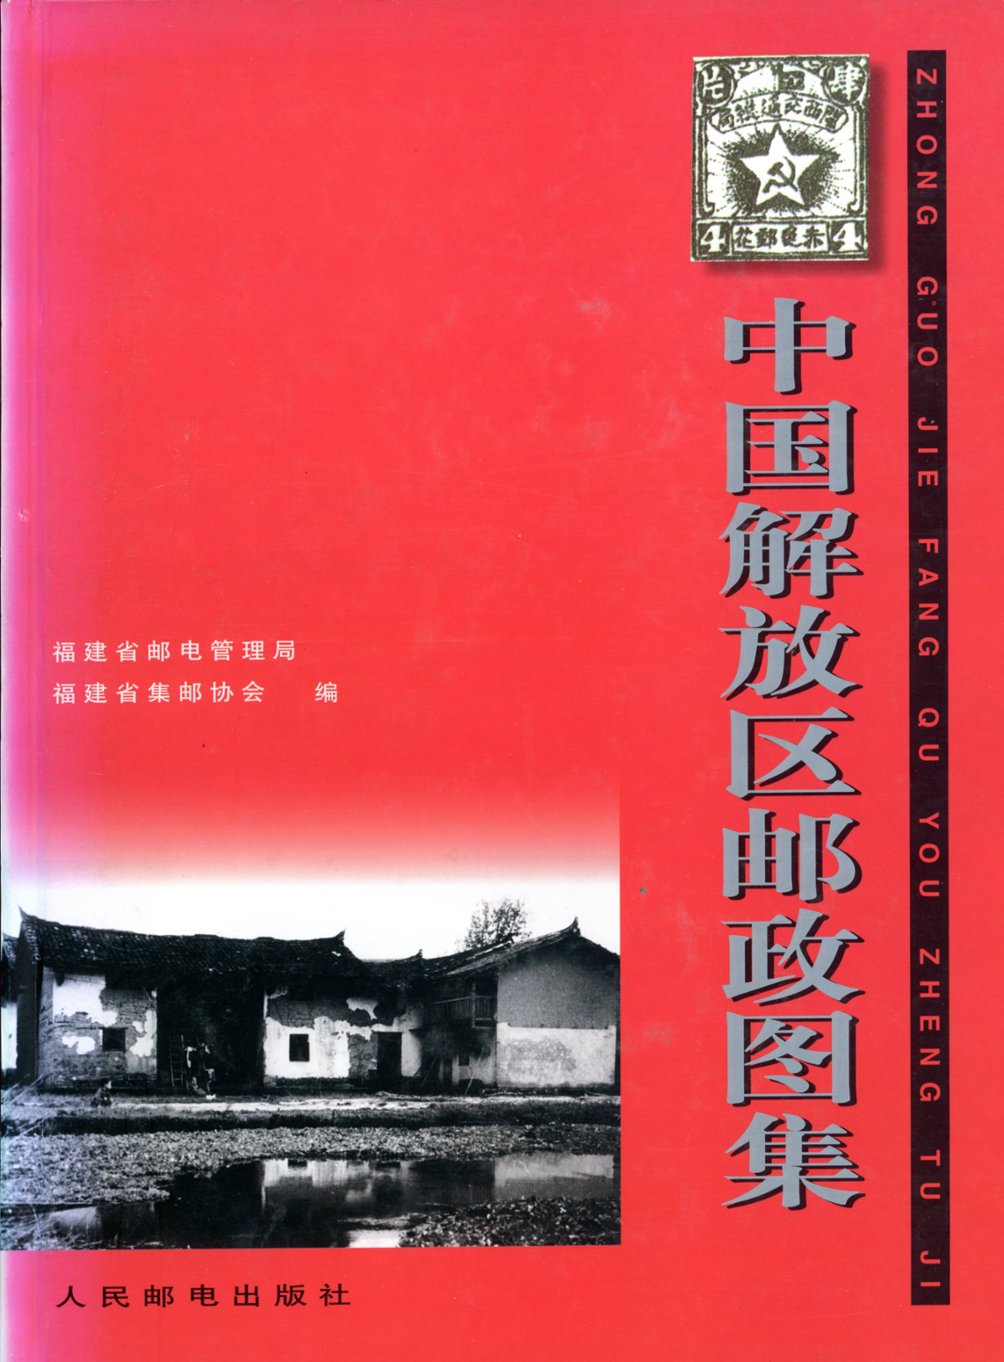 Zhongguo Jiefangqu Youzheng Tuji (A Picture Album of China's Liberated Area Posts) (1996), in Chinese, hardbound as new (1 lb 8 oz) (2 images)